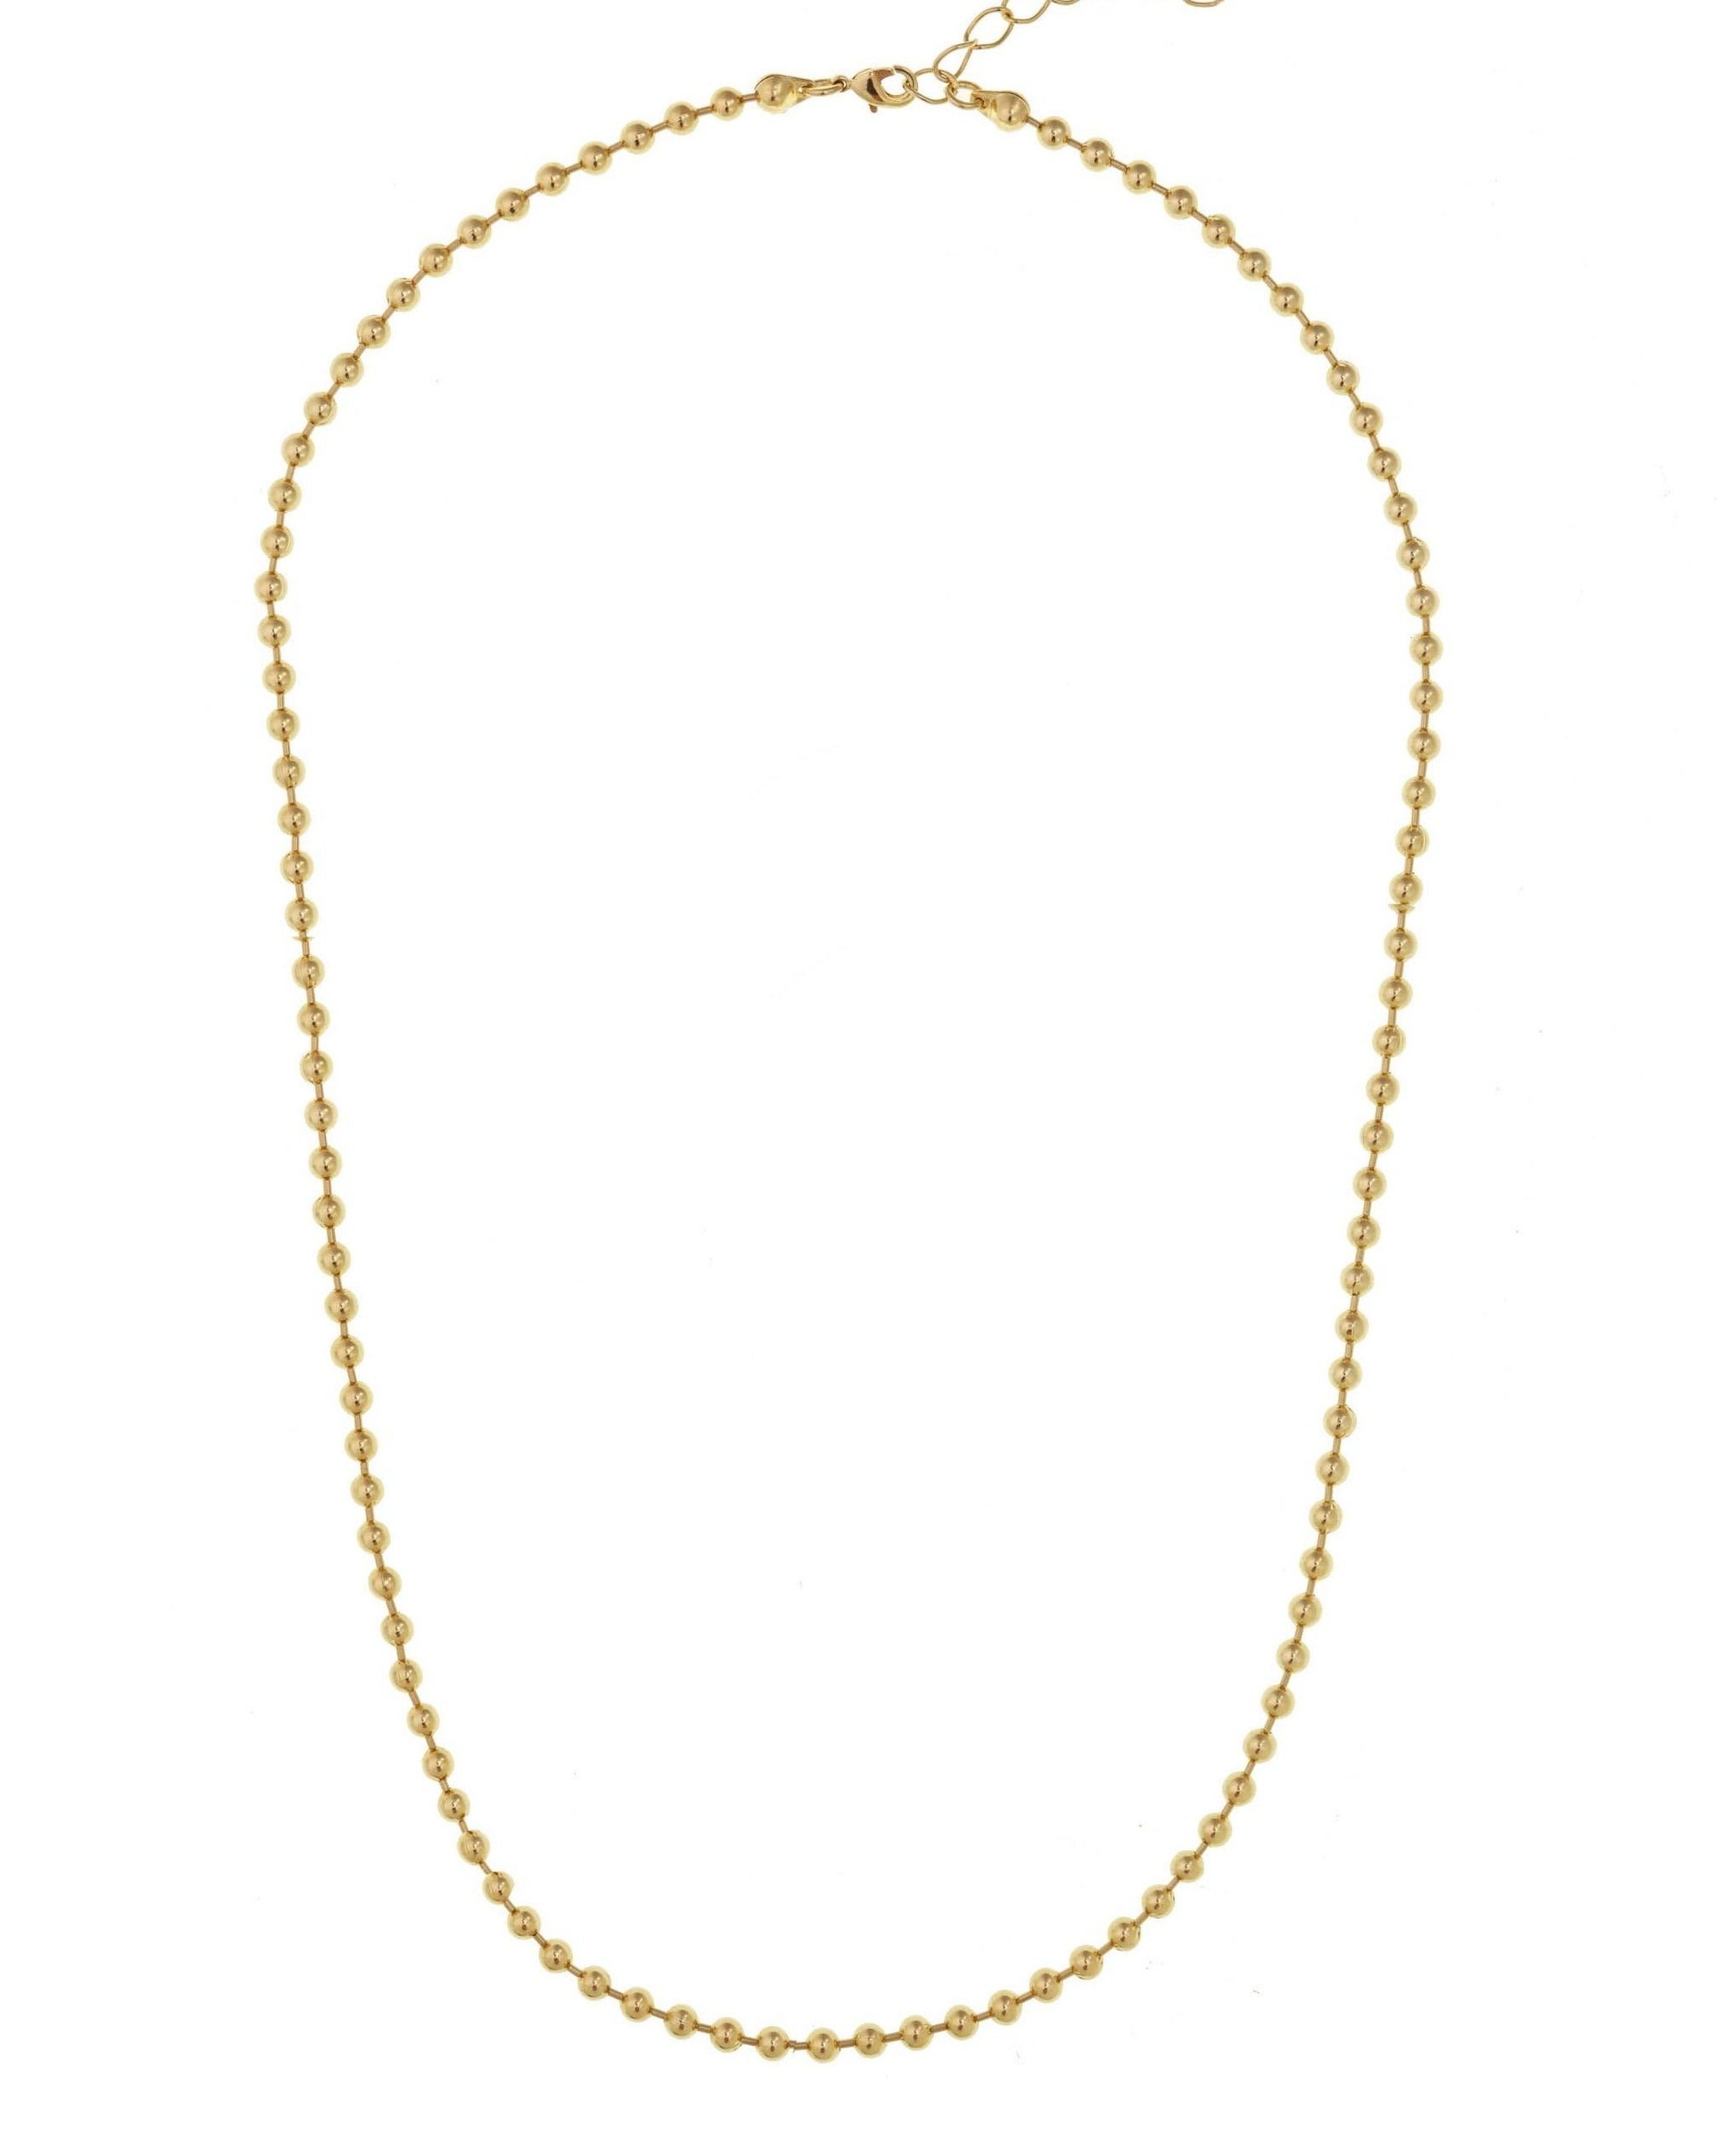 Circul Necklace by KOZAKH. An 18 inch long necklace in 18k Gold Bonded with anti-tarnish treatment, featuring 3mm round links.